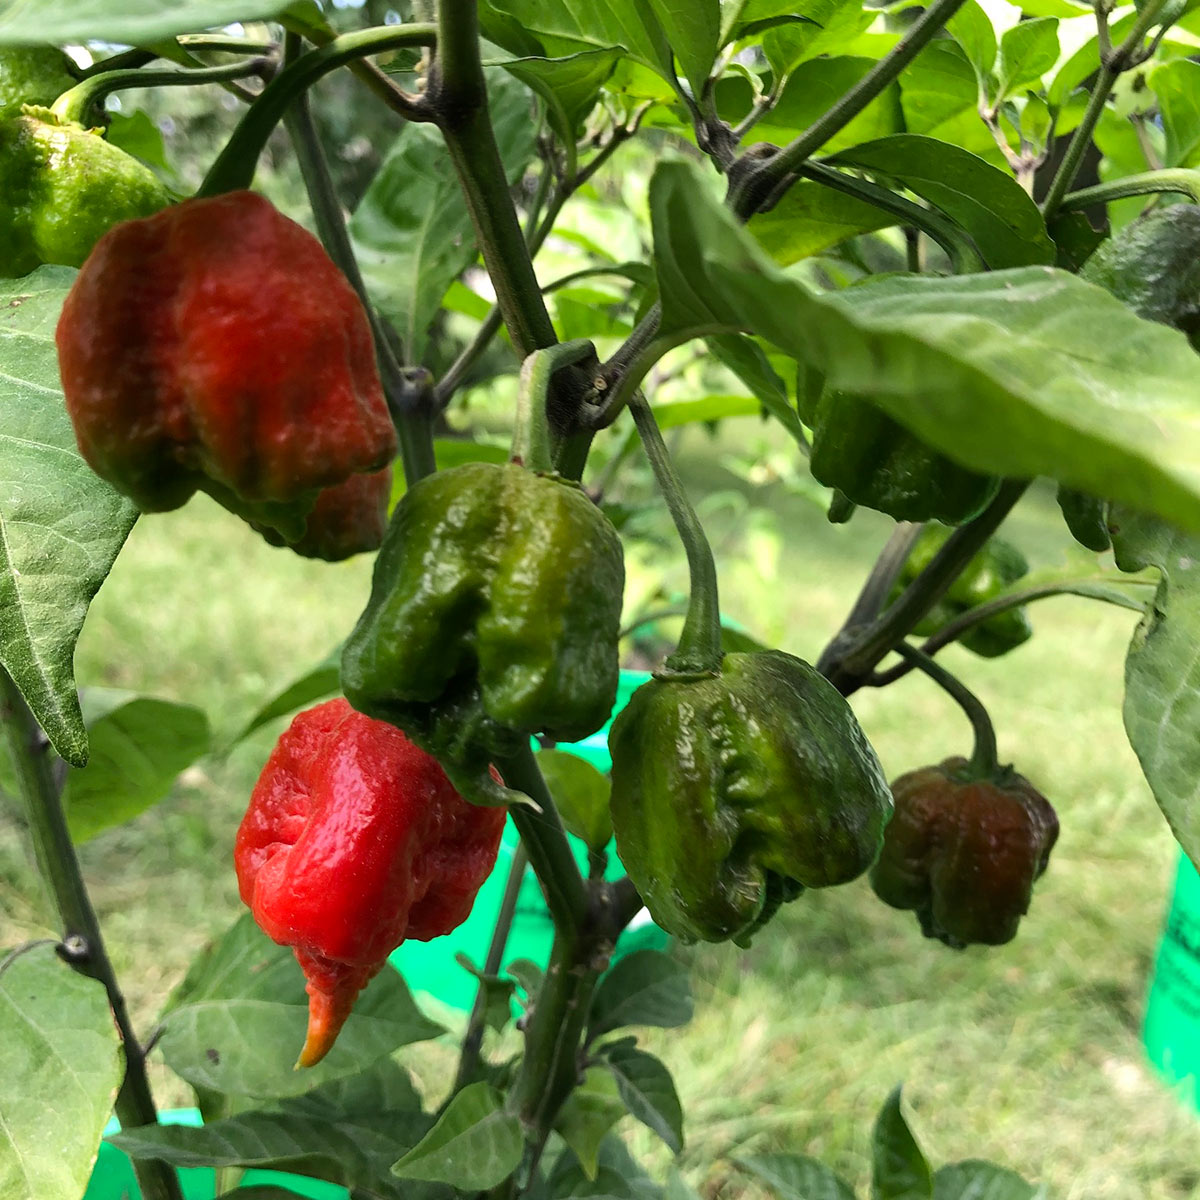 Pepper Joe's dragon breath seeds - green and red Dragons Breath pods on plant